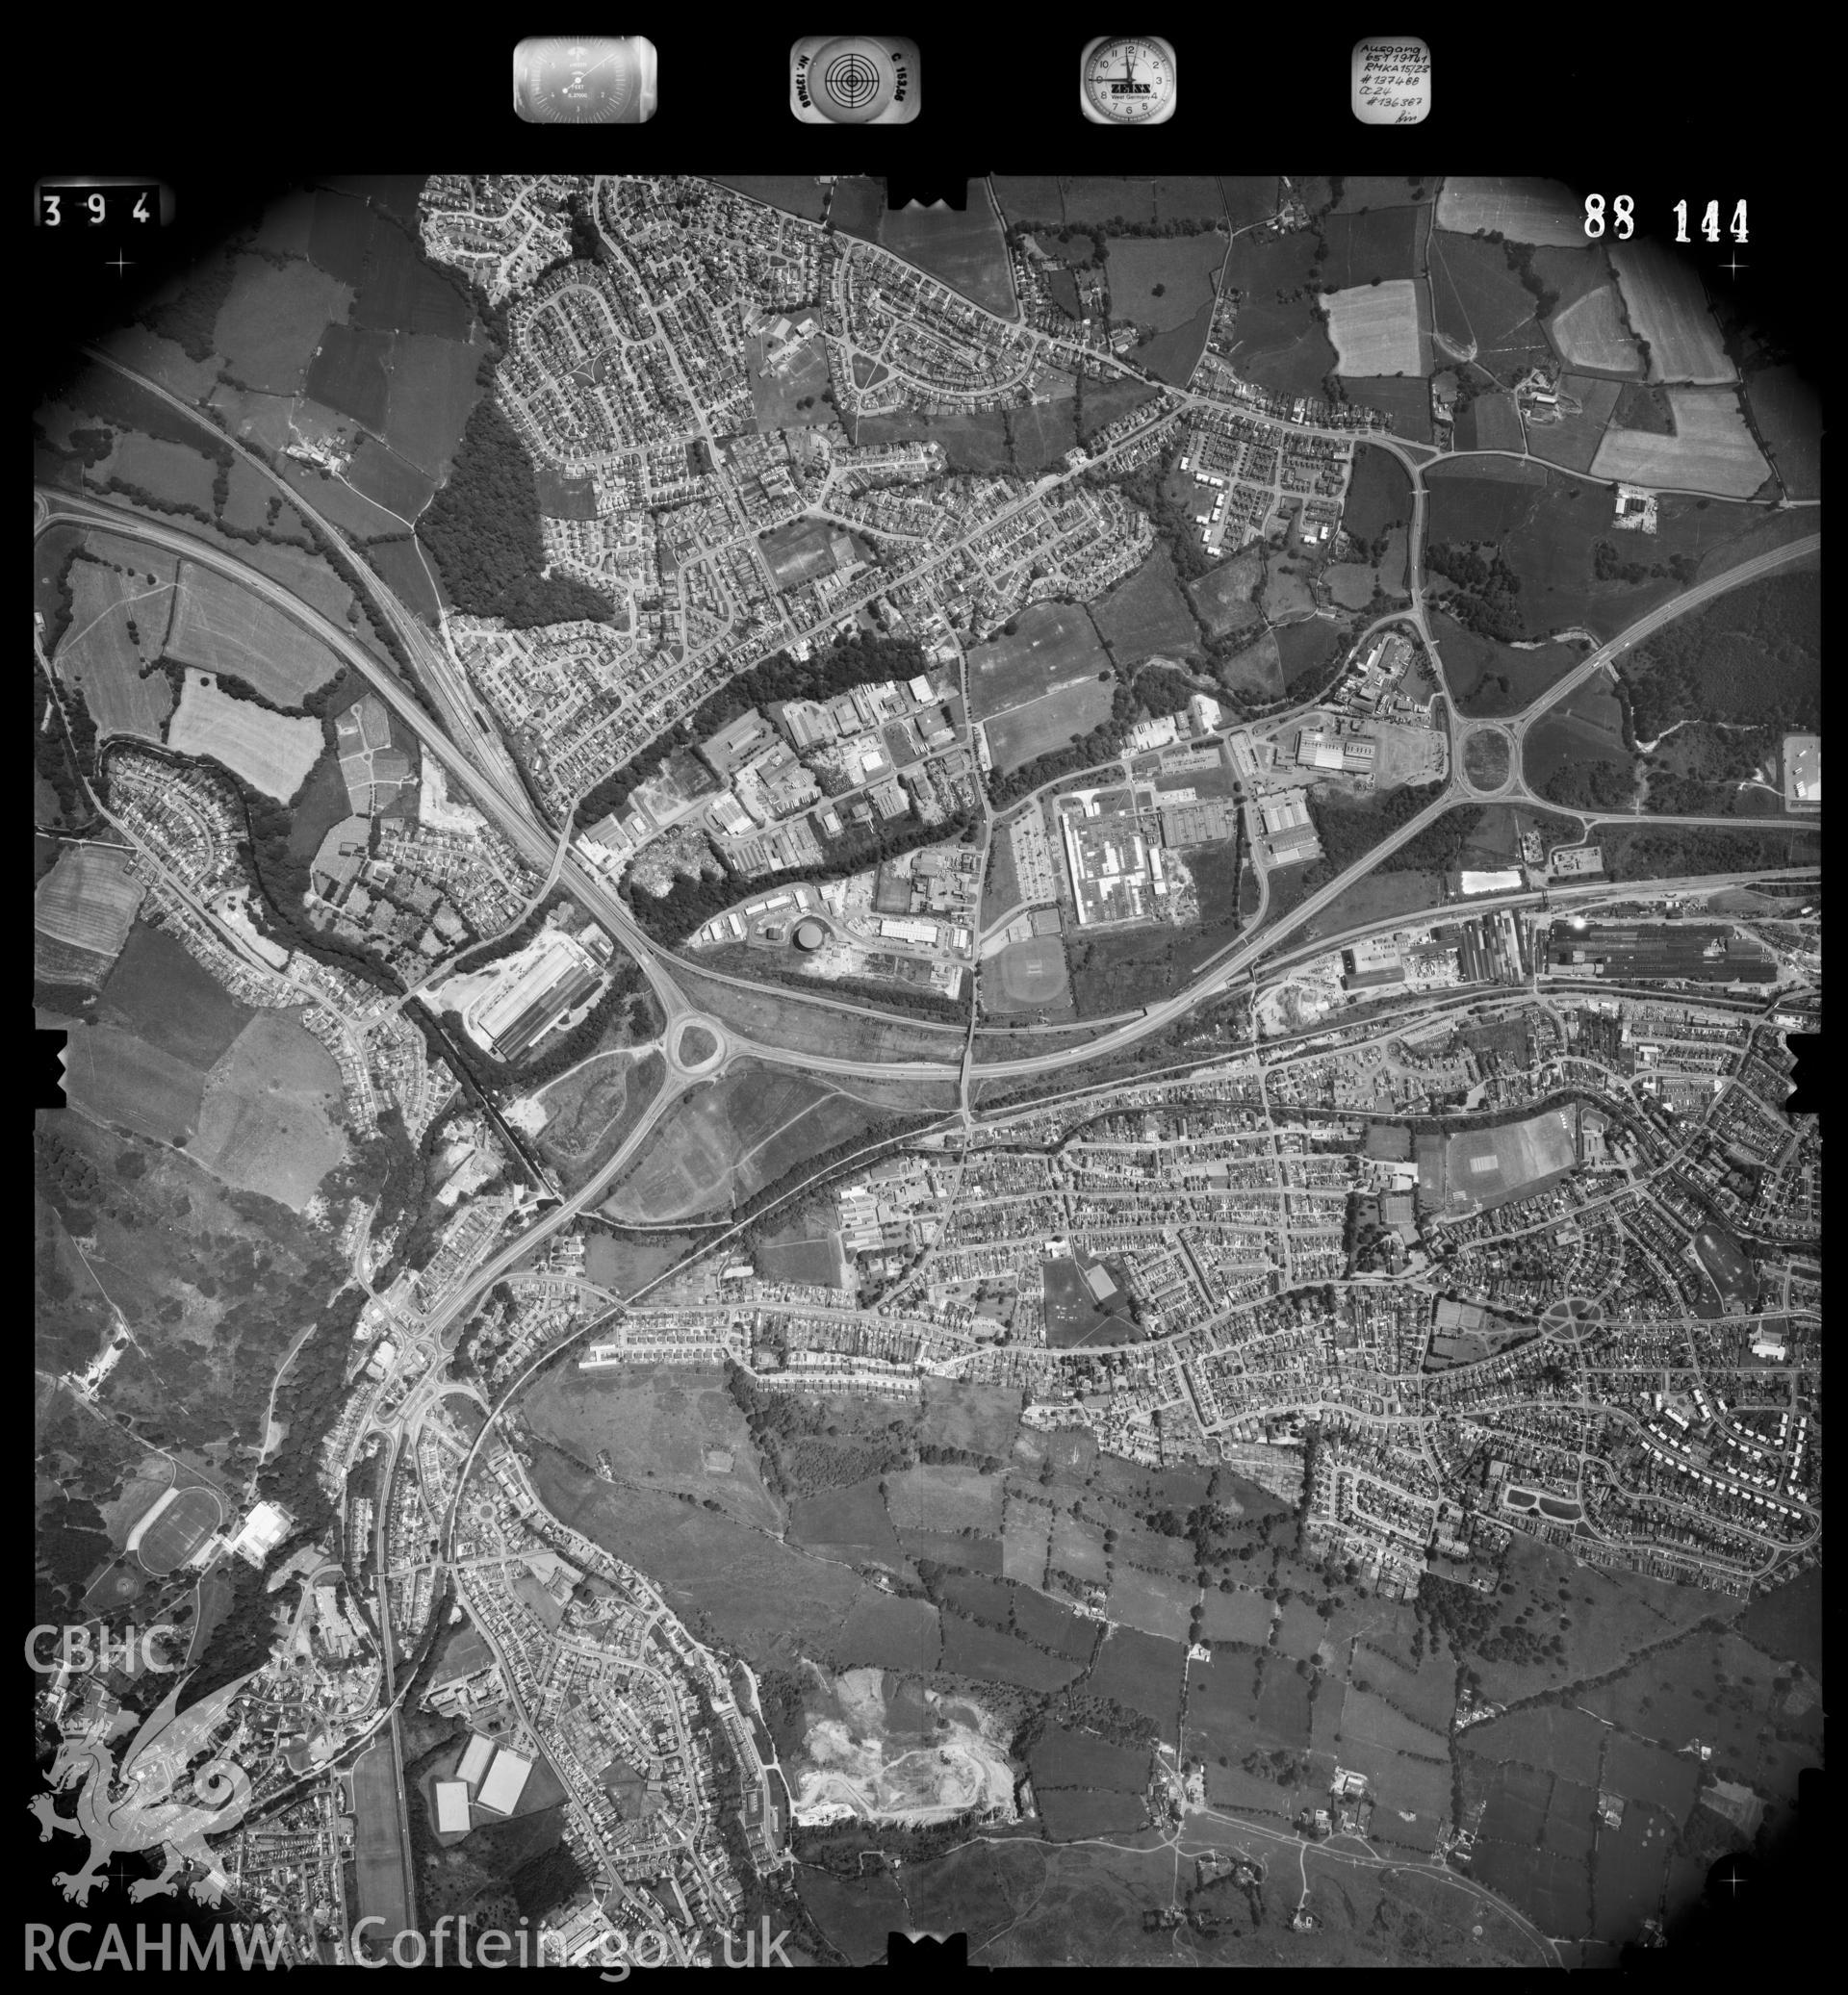 Digitized copy of an aerial photograph showing Pontypool area, taken by Ordnance Survey, 1988.